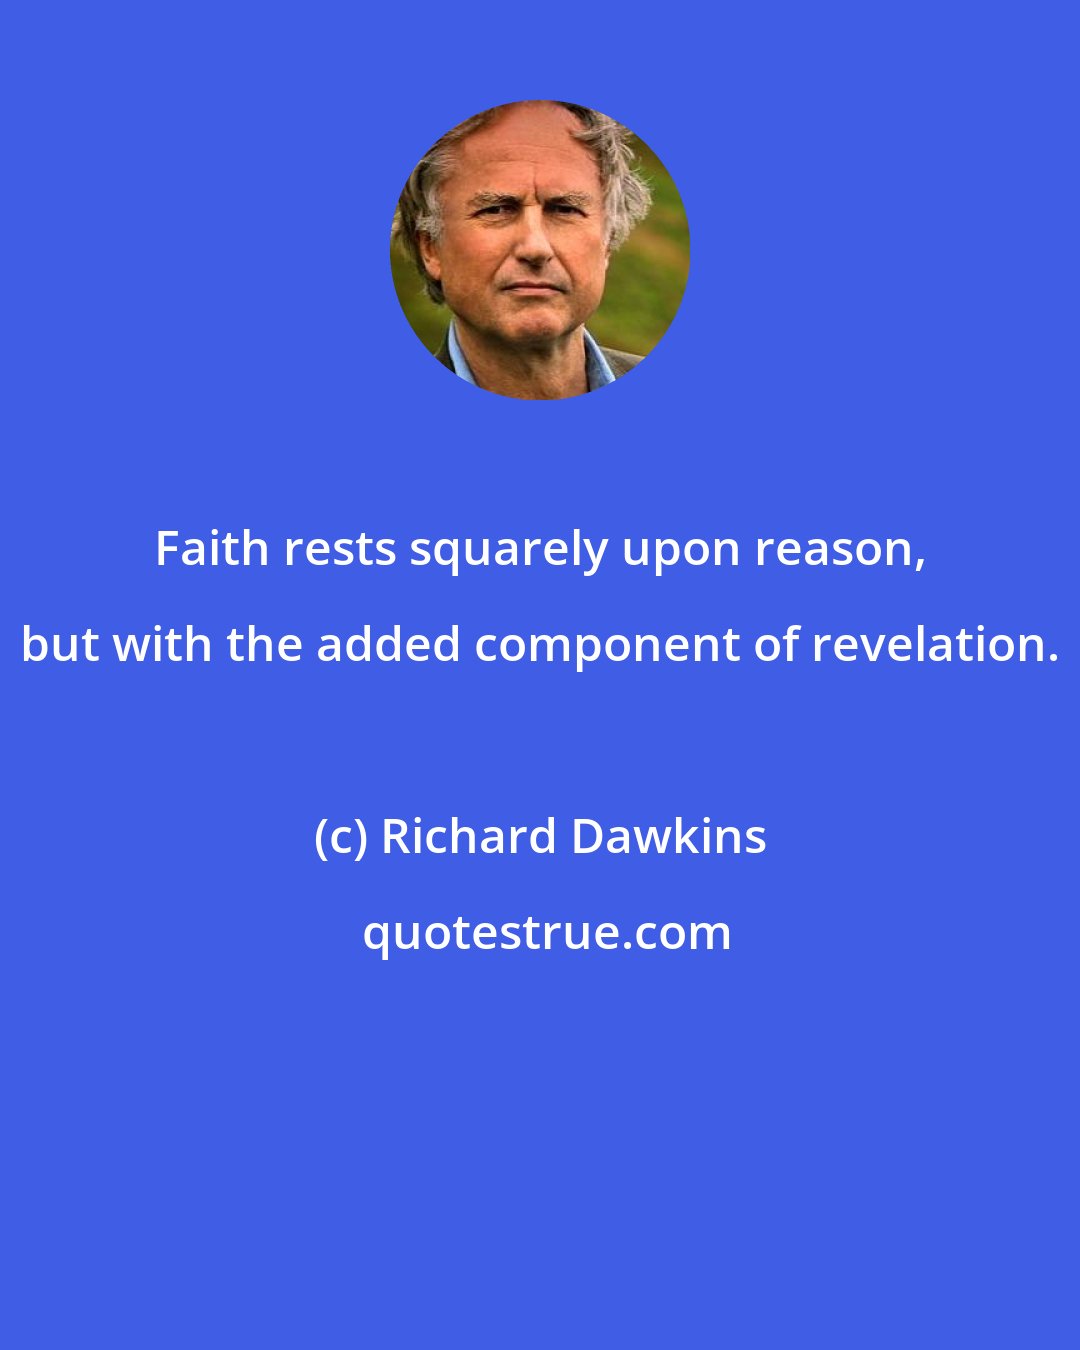 Richard Dawkins: Faith rests squarely upon reason, but with the added component of revelation.